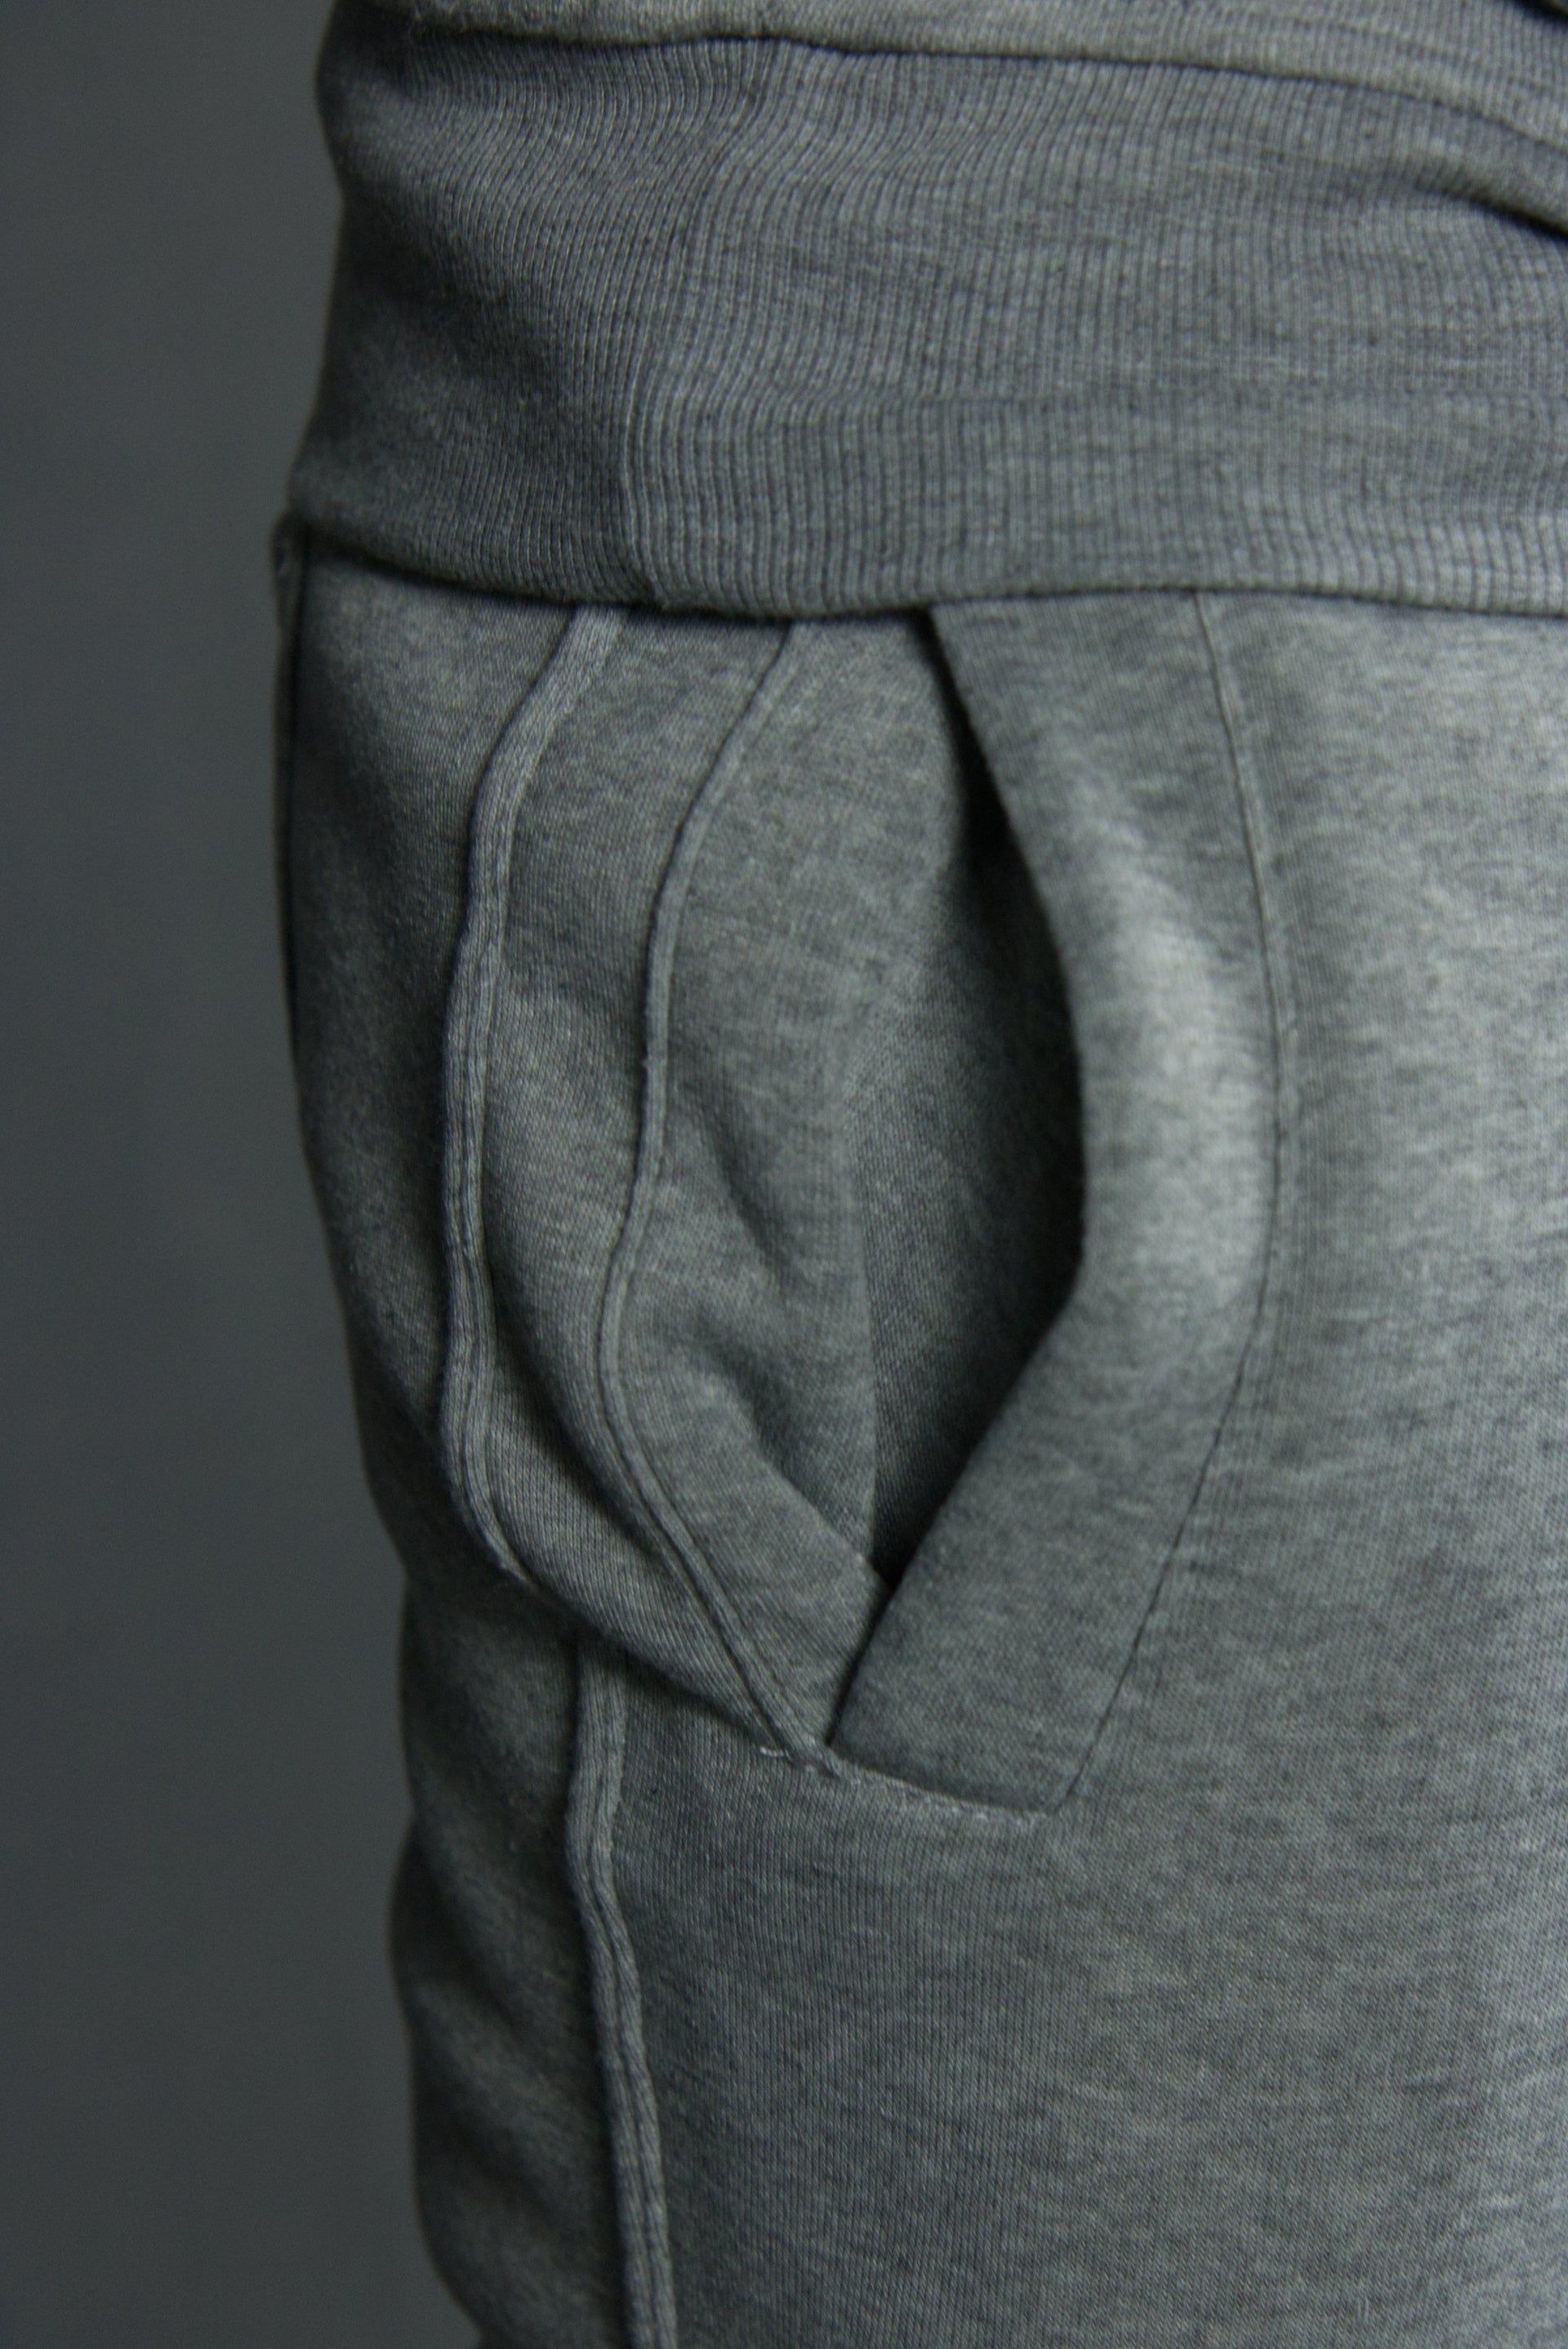 The side of the suede fleece heather gray tapered track sweatpants had a hem running down the length of the leg